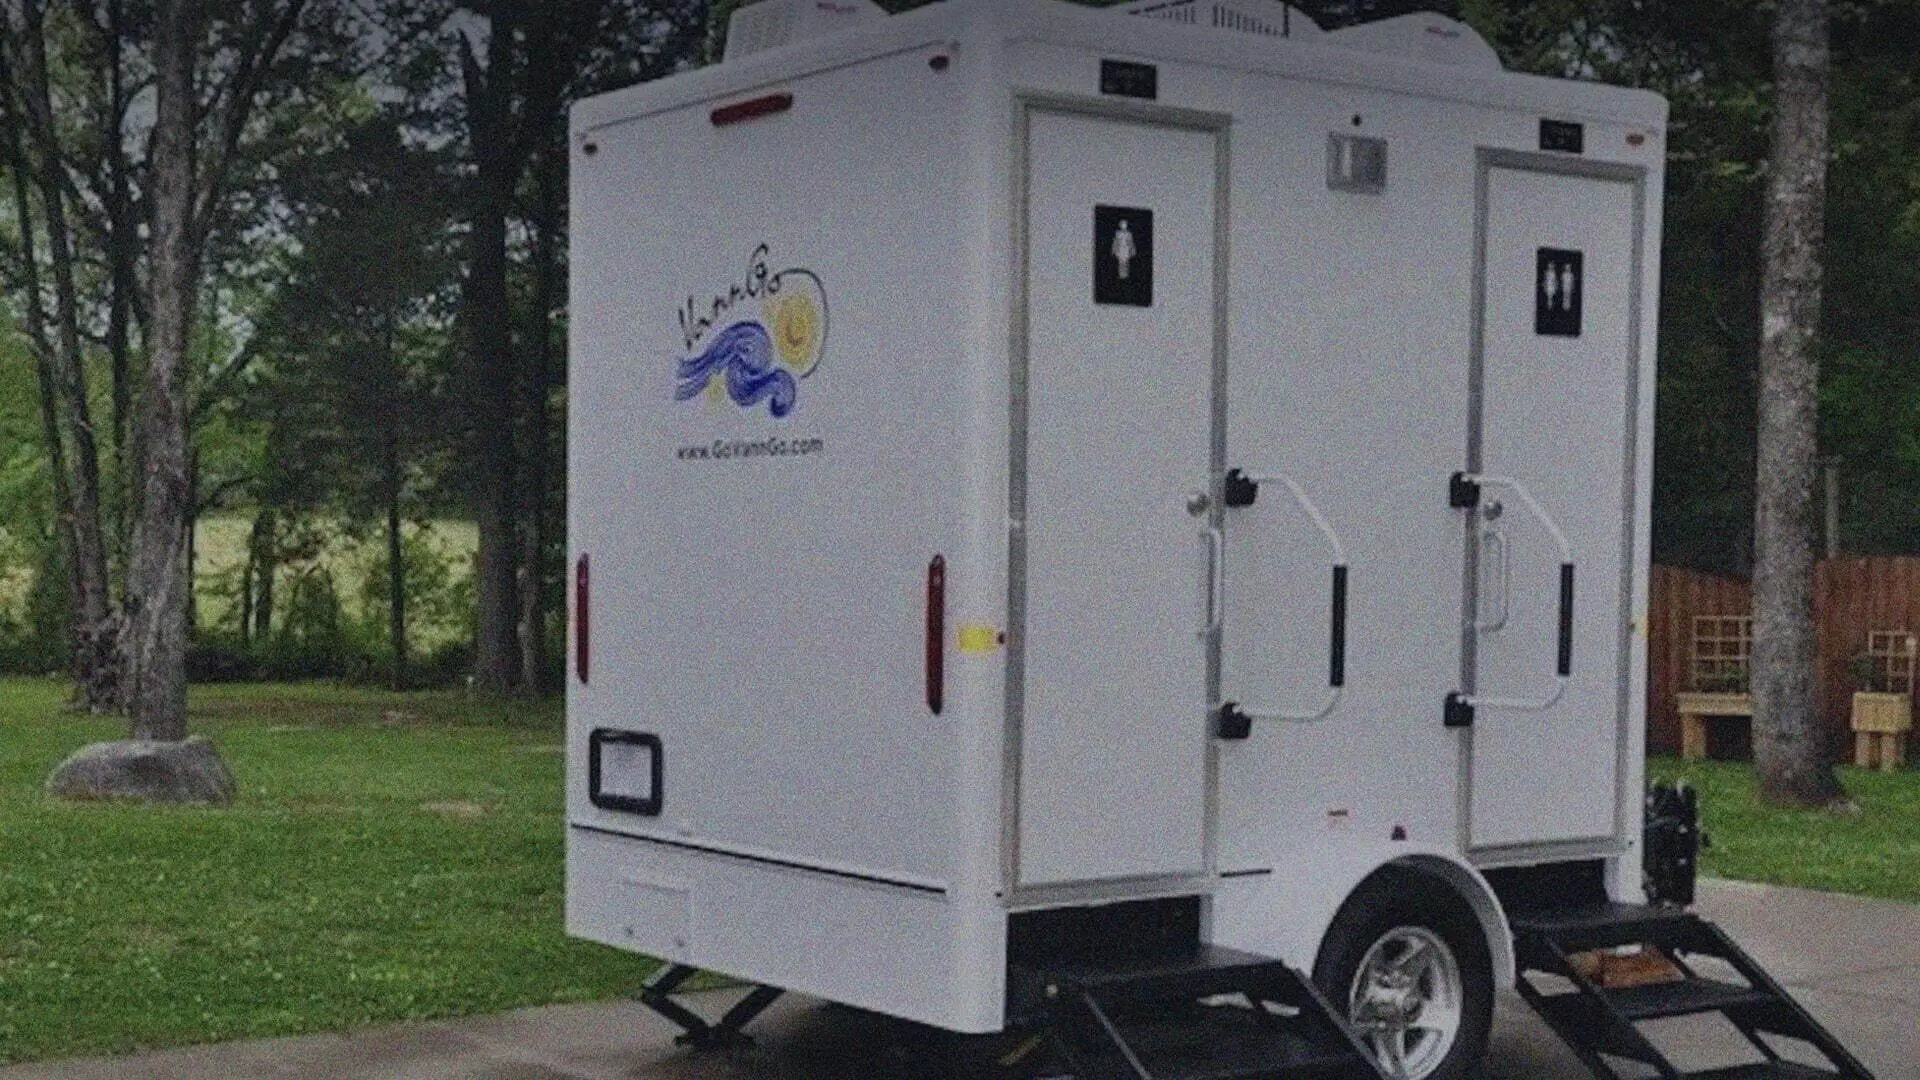 Portable Toilet Operator Uses ServiceCore As Their “Secret Weapon” To Grow Portable Sanitation Business | Blog for Portable Toilet & Dumpster Rental Businesses | ServiceCore